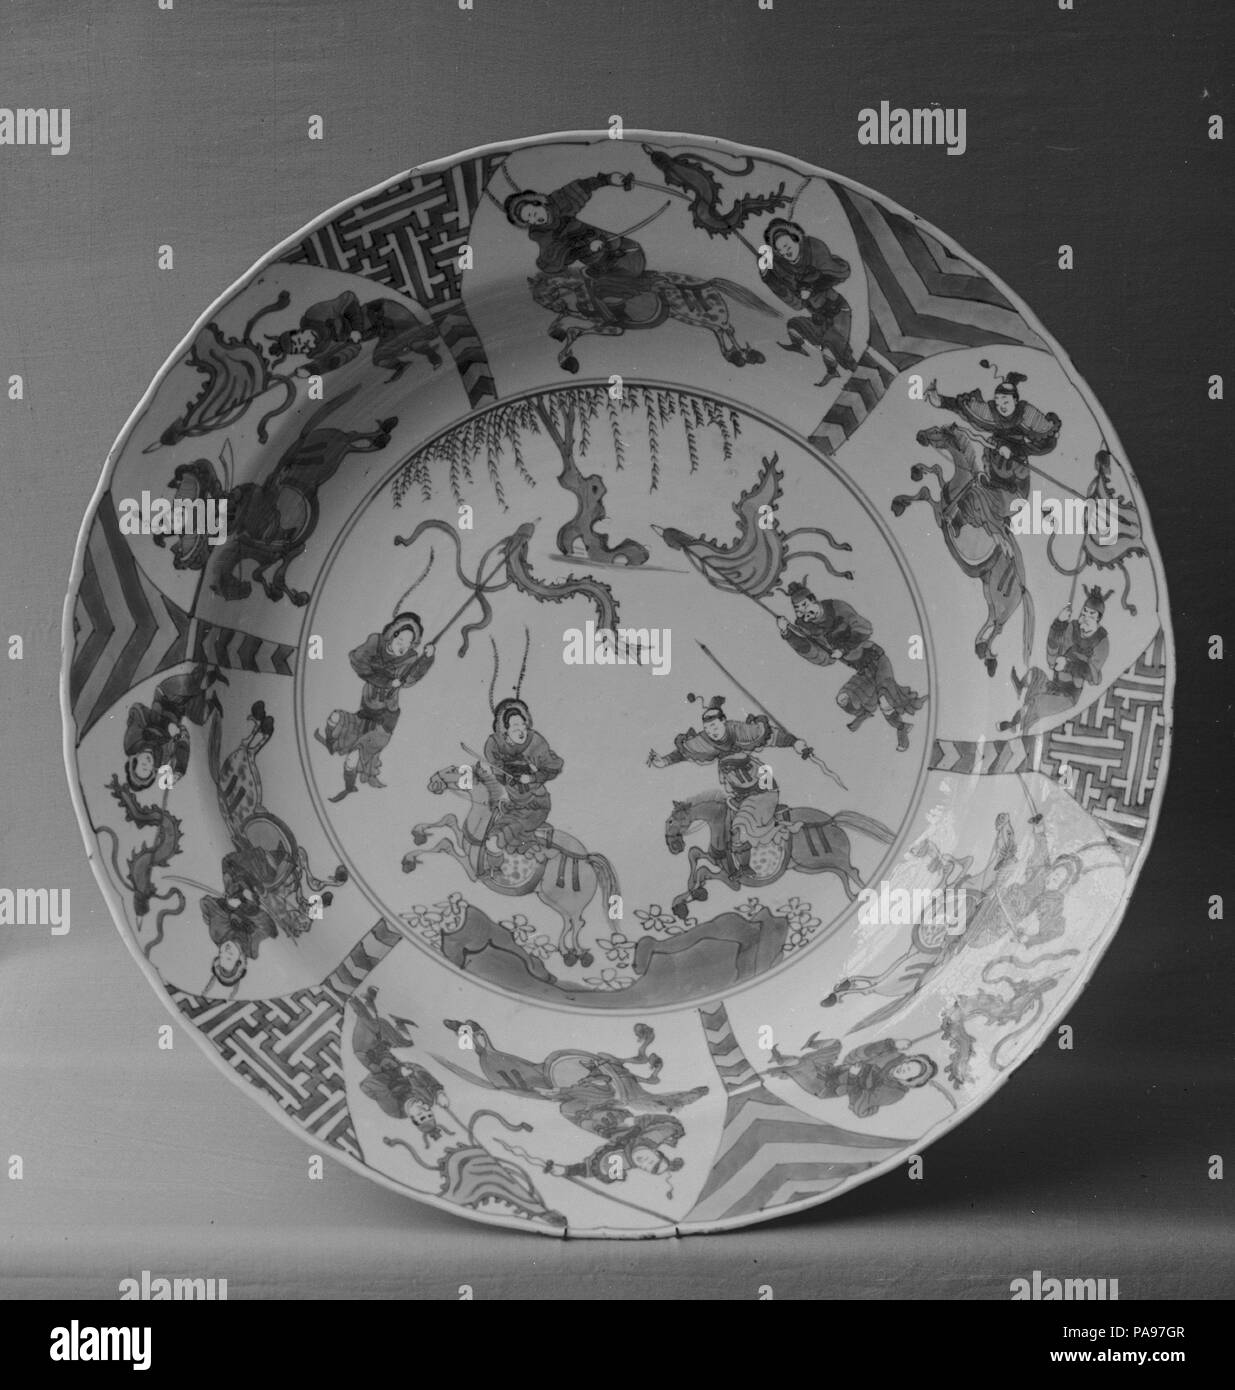 Plate. Culture: China. Dimensions: Diam. 14 3/4 in. (37.5 cm). Date: late 17th-early 18th century. Museum: Metropolitan Museum of Art, New York, USA. Stock Photo